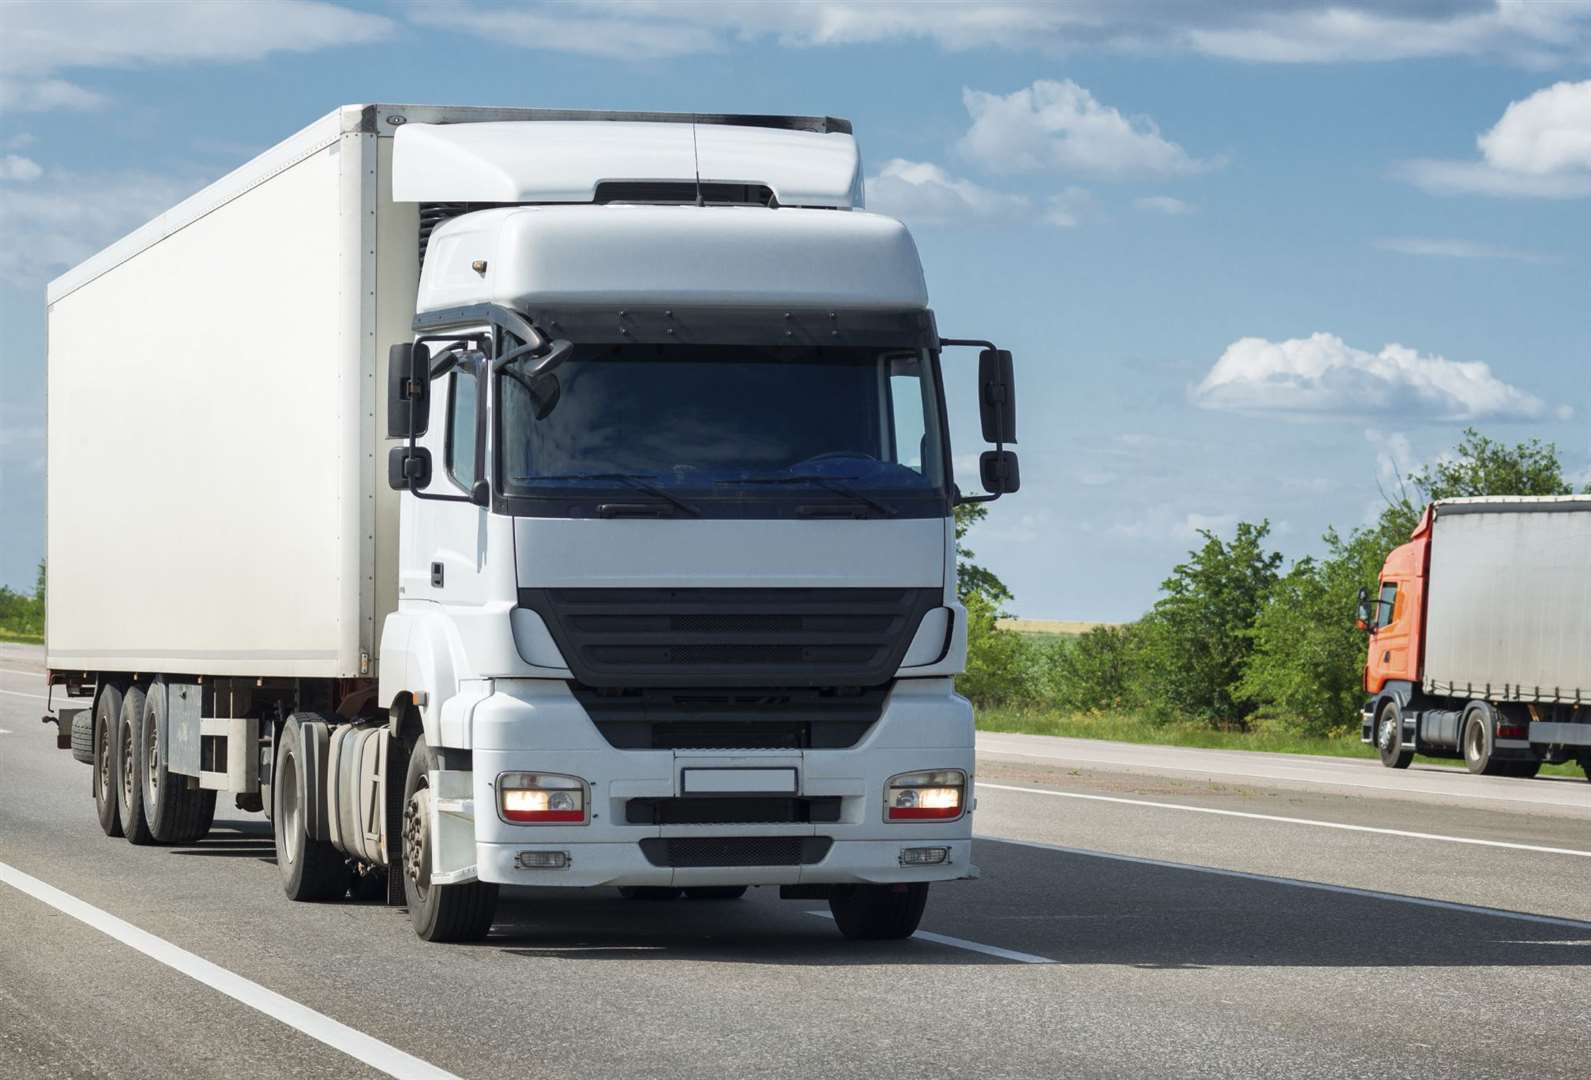 The new lorries will have trailers more than two metres longer. Image: iStock.